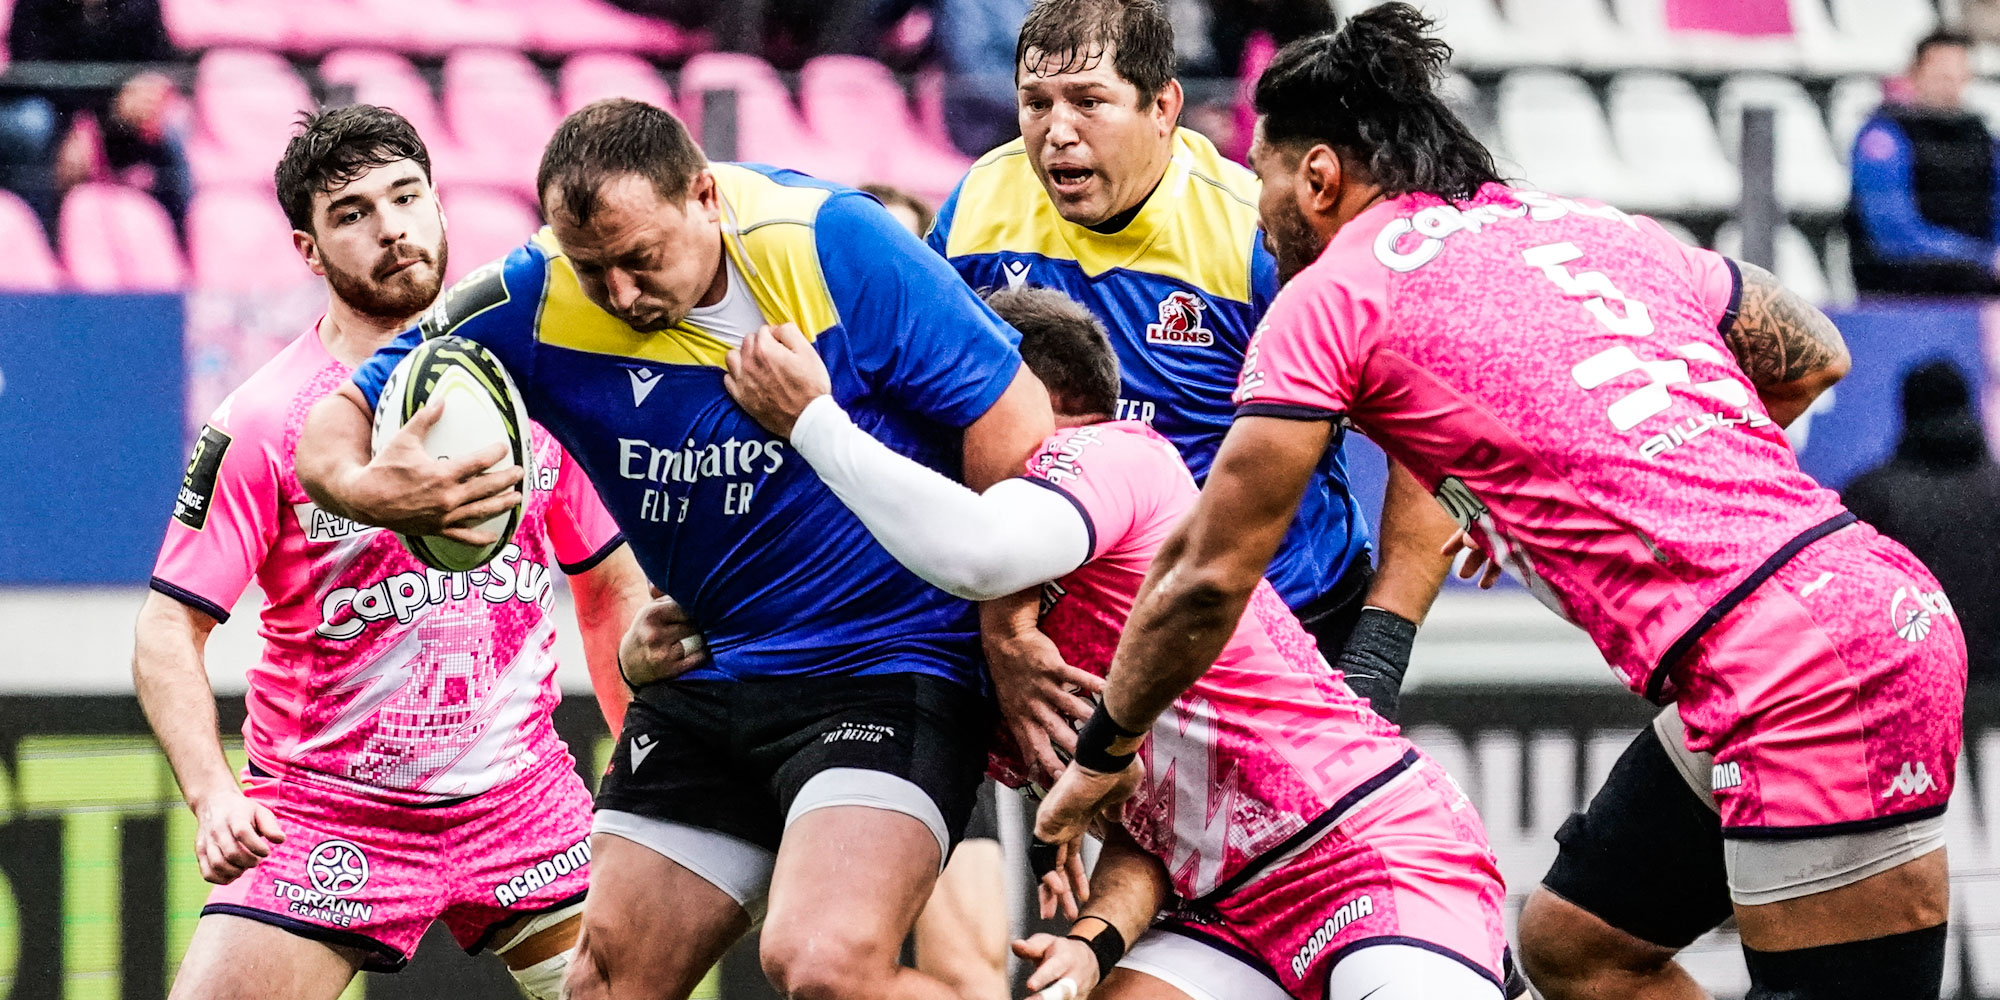 JP Smith in action for the Emirates Lions against Stade Francais last weekend.